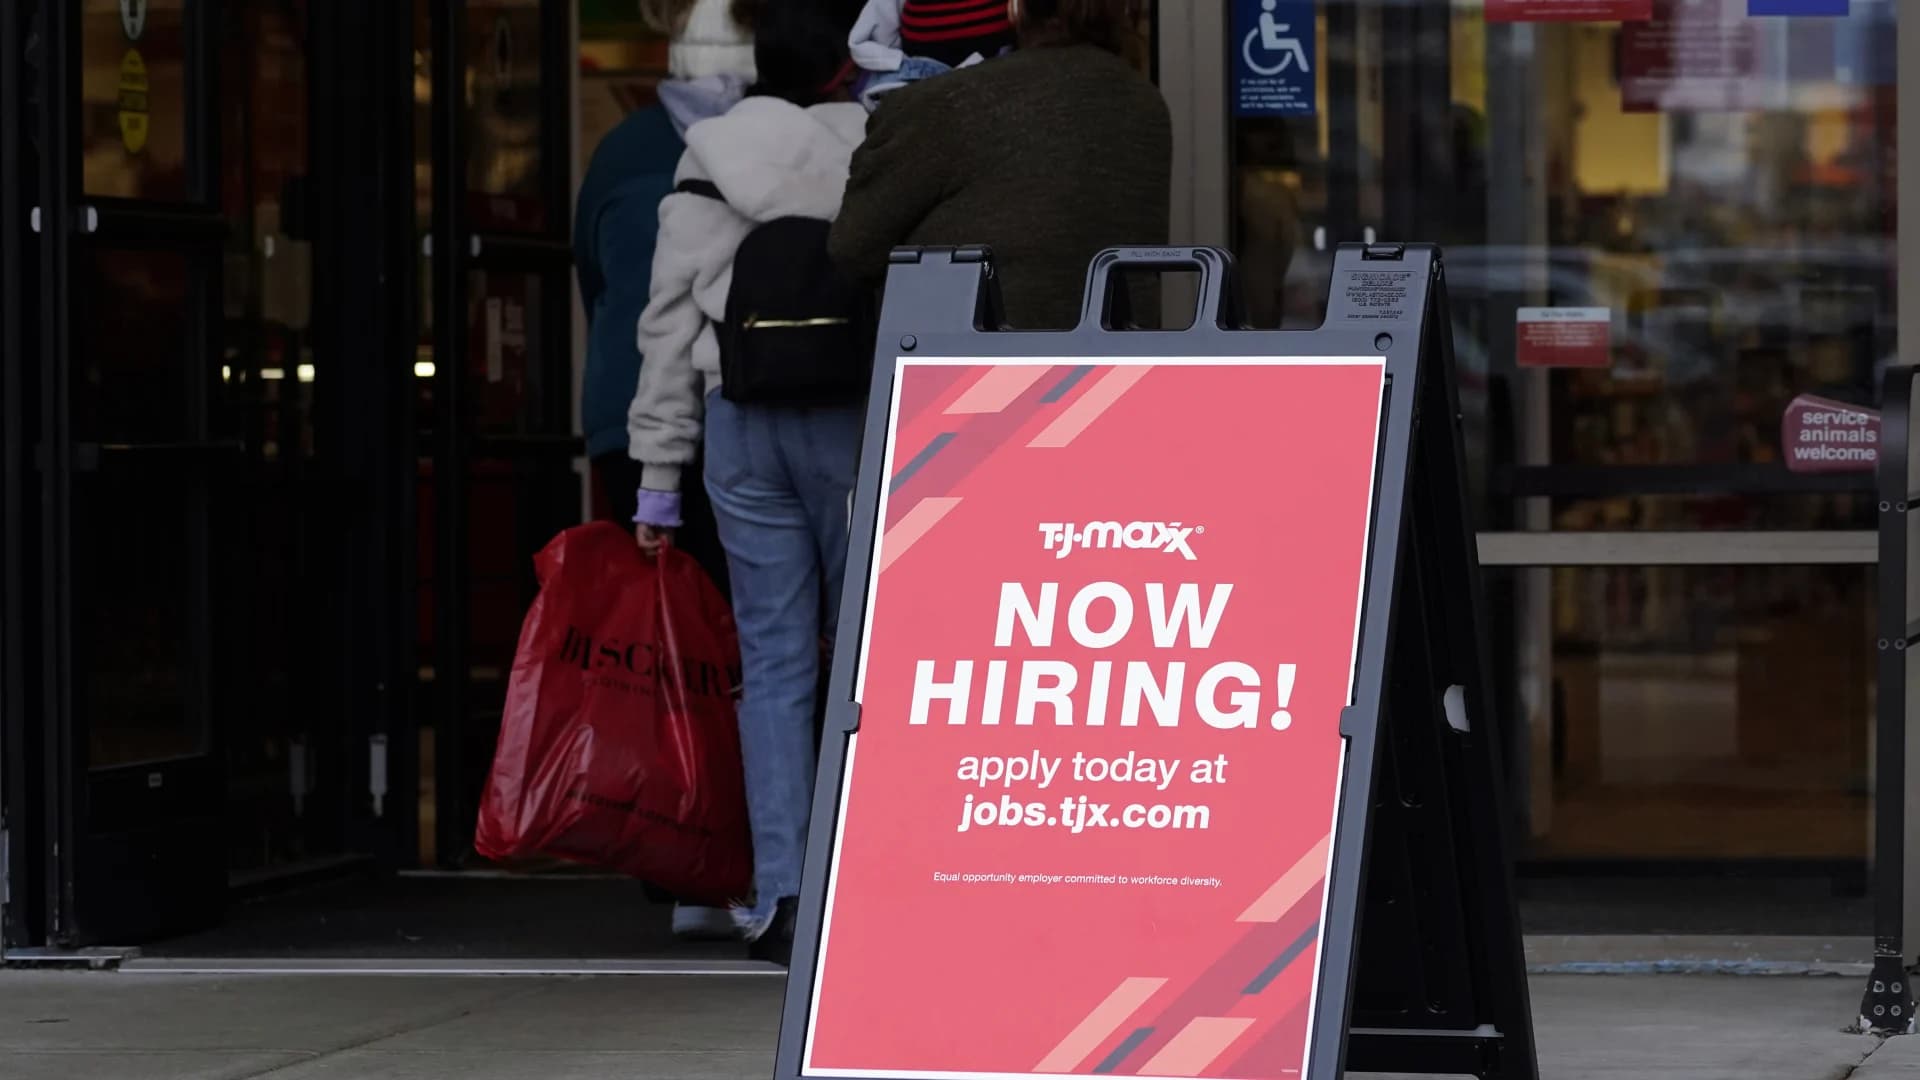 US jobless claims hit 52-year low after seasonal adjustments